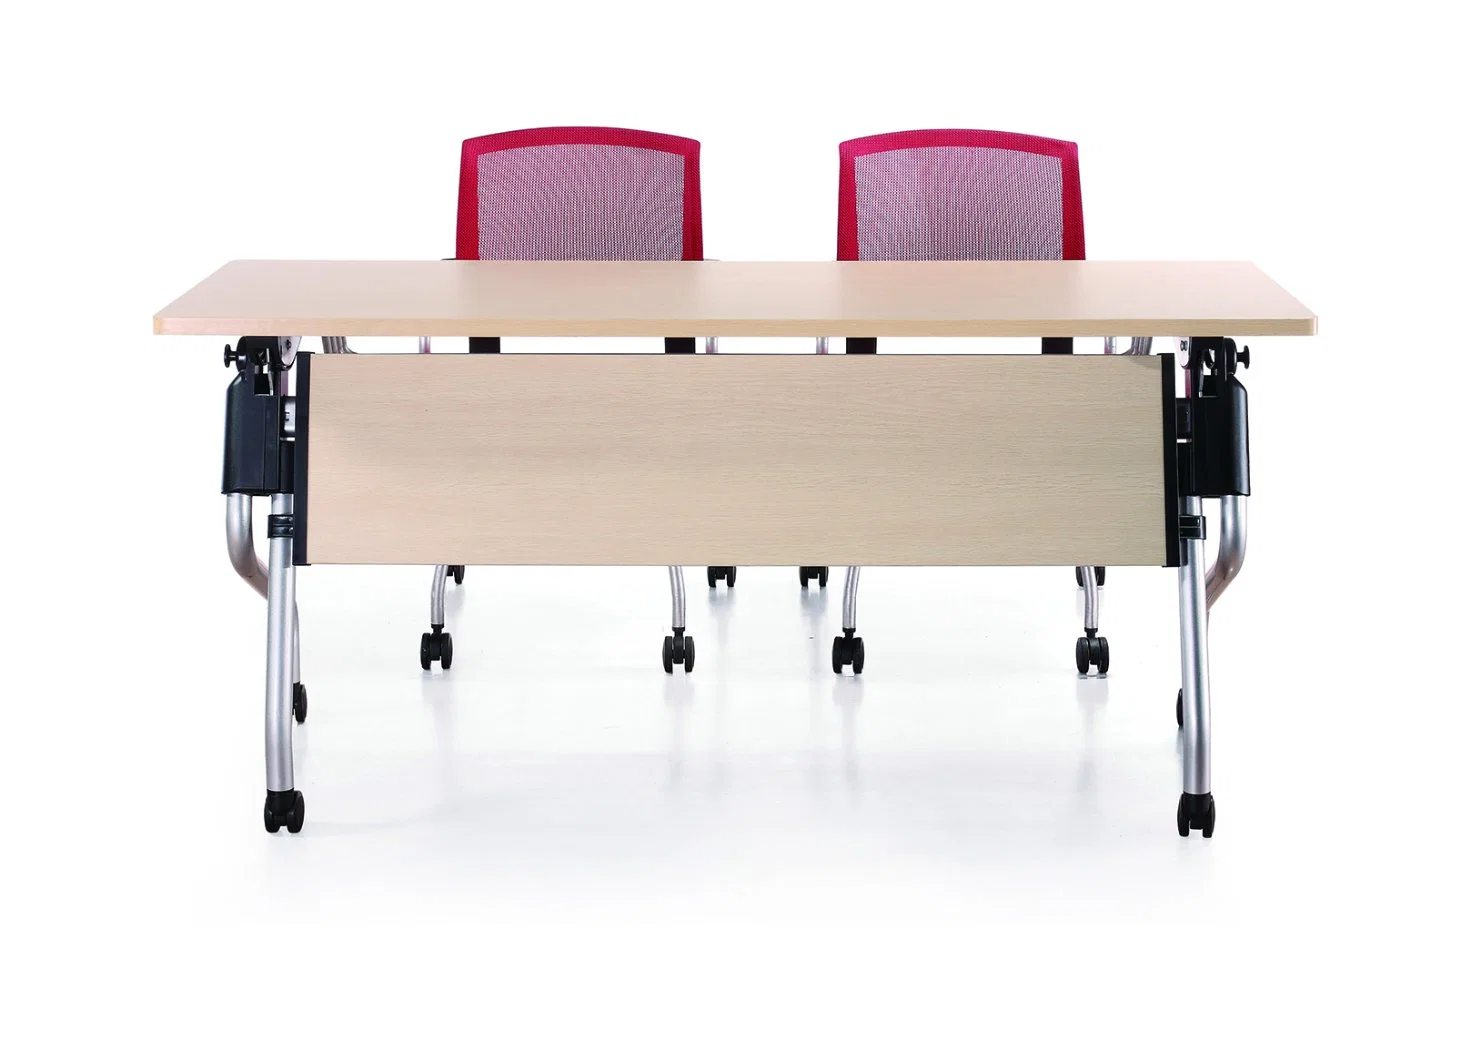 Widely Used Computer Training Swivel Folding Office Conference Furniture